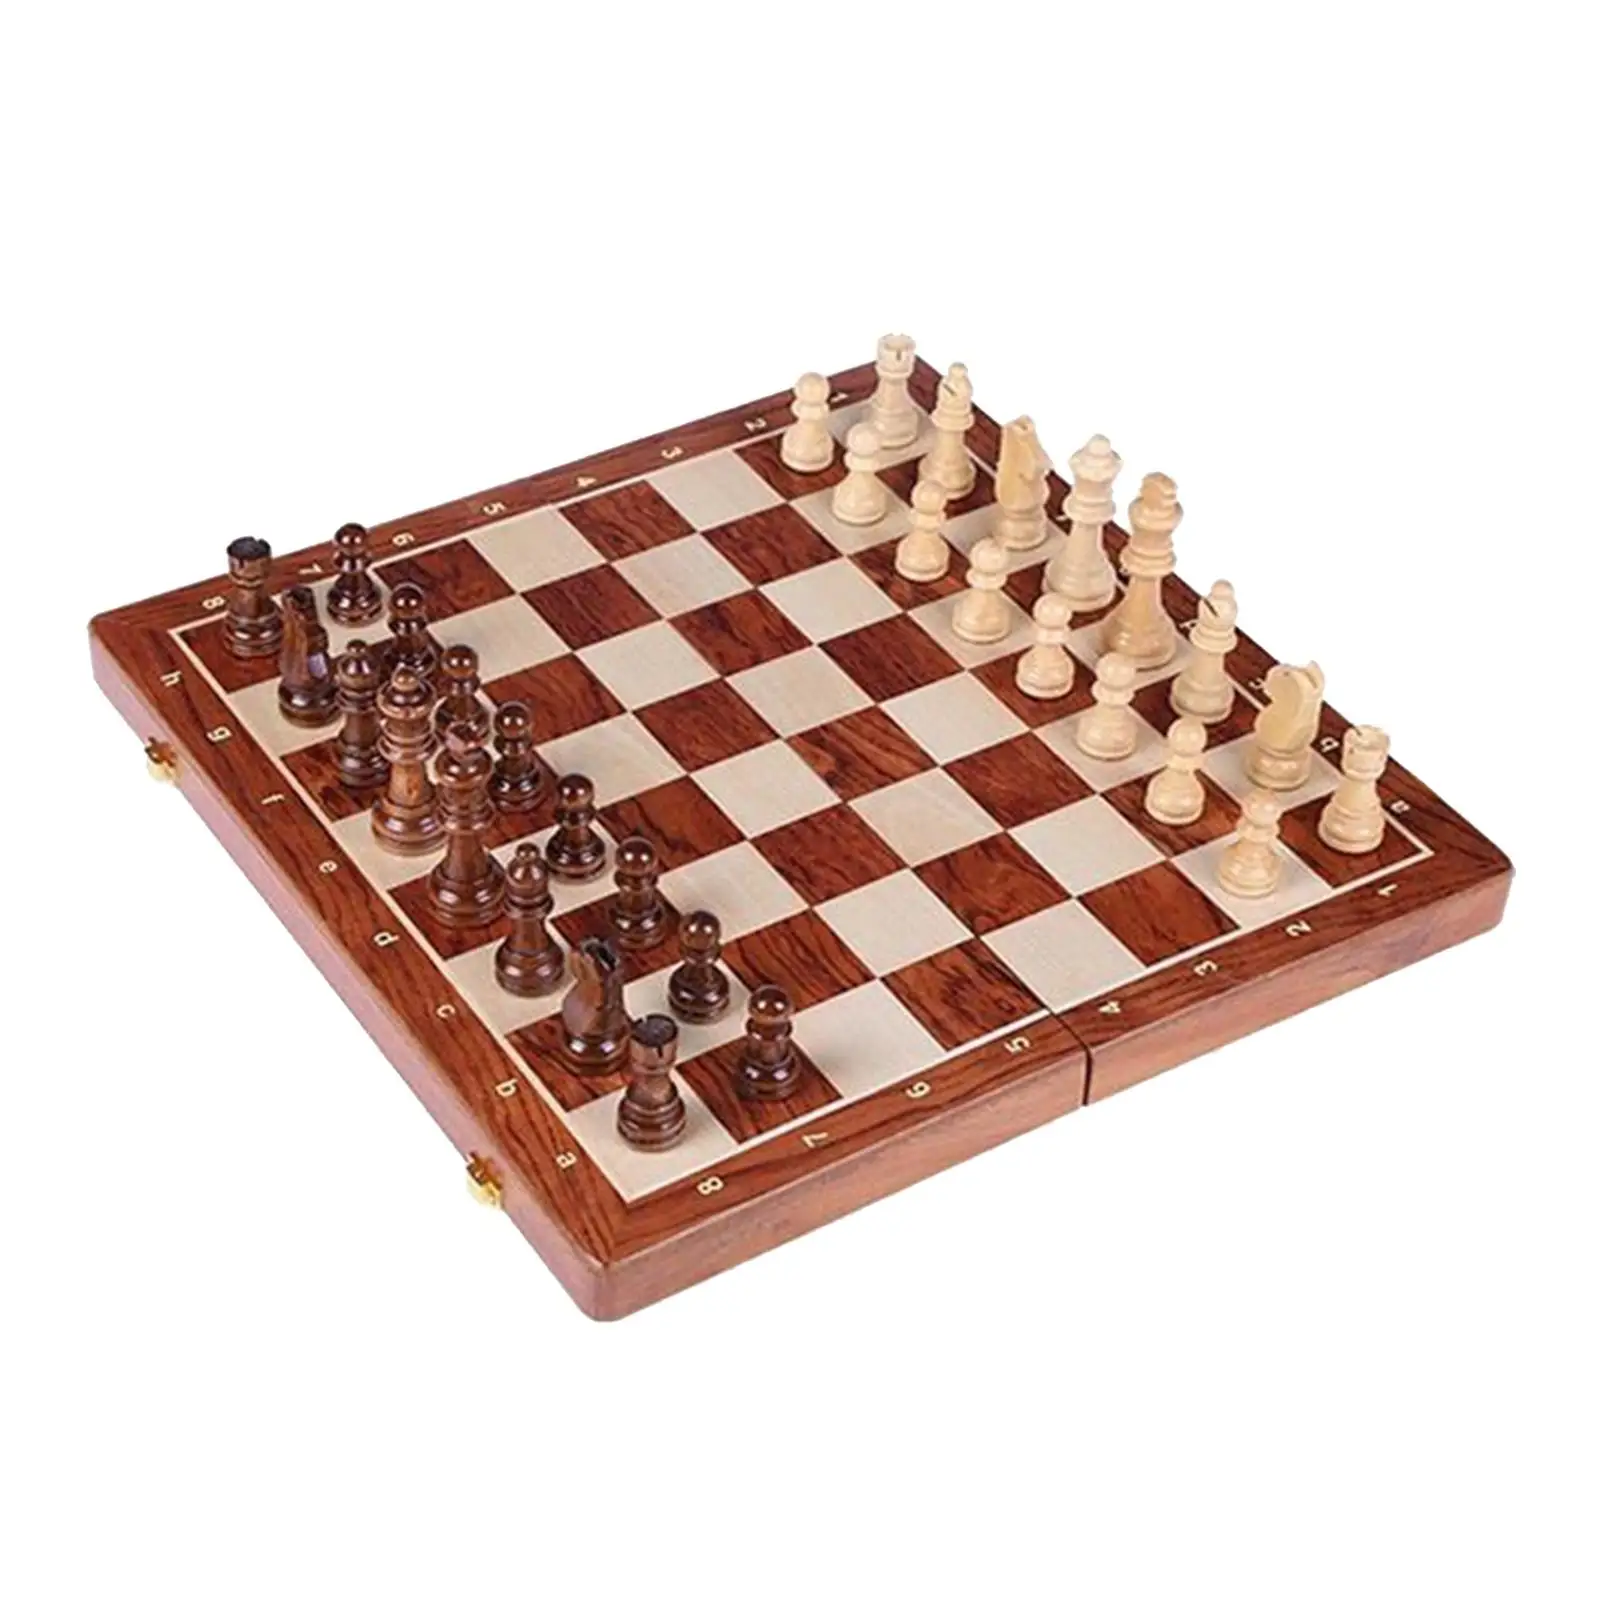 Wooden Chess Set - Handcrafted Chess Pieces - 15 Inch Chess  Foldable - Travel Friendly - Felt Bottom  Wooden Pieces